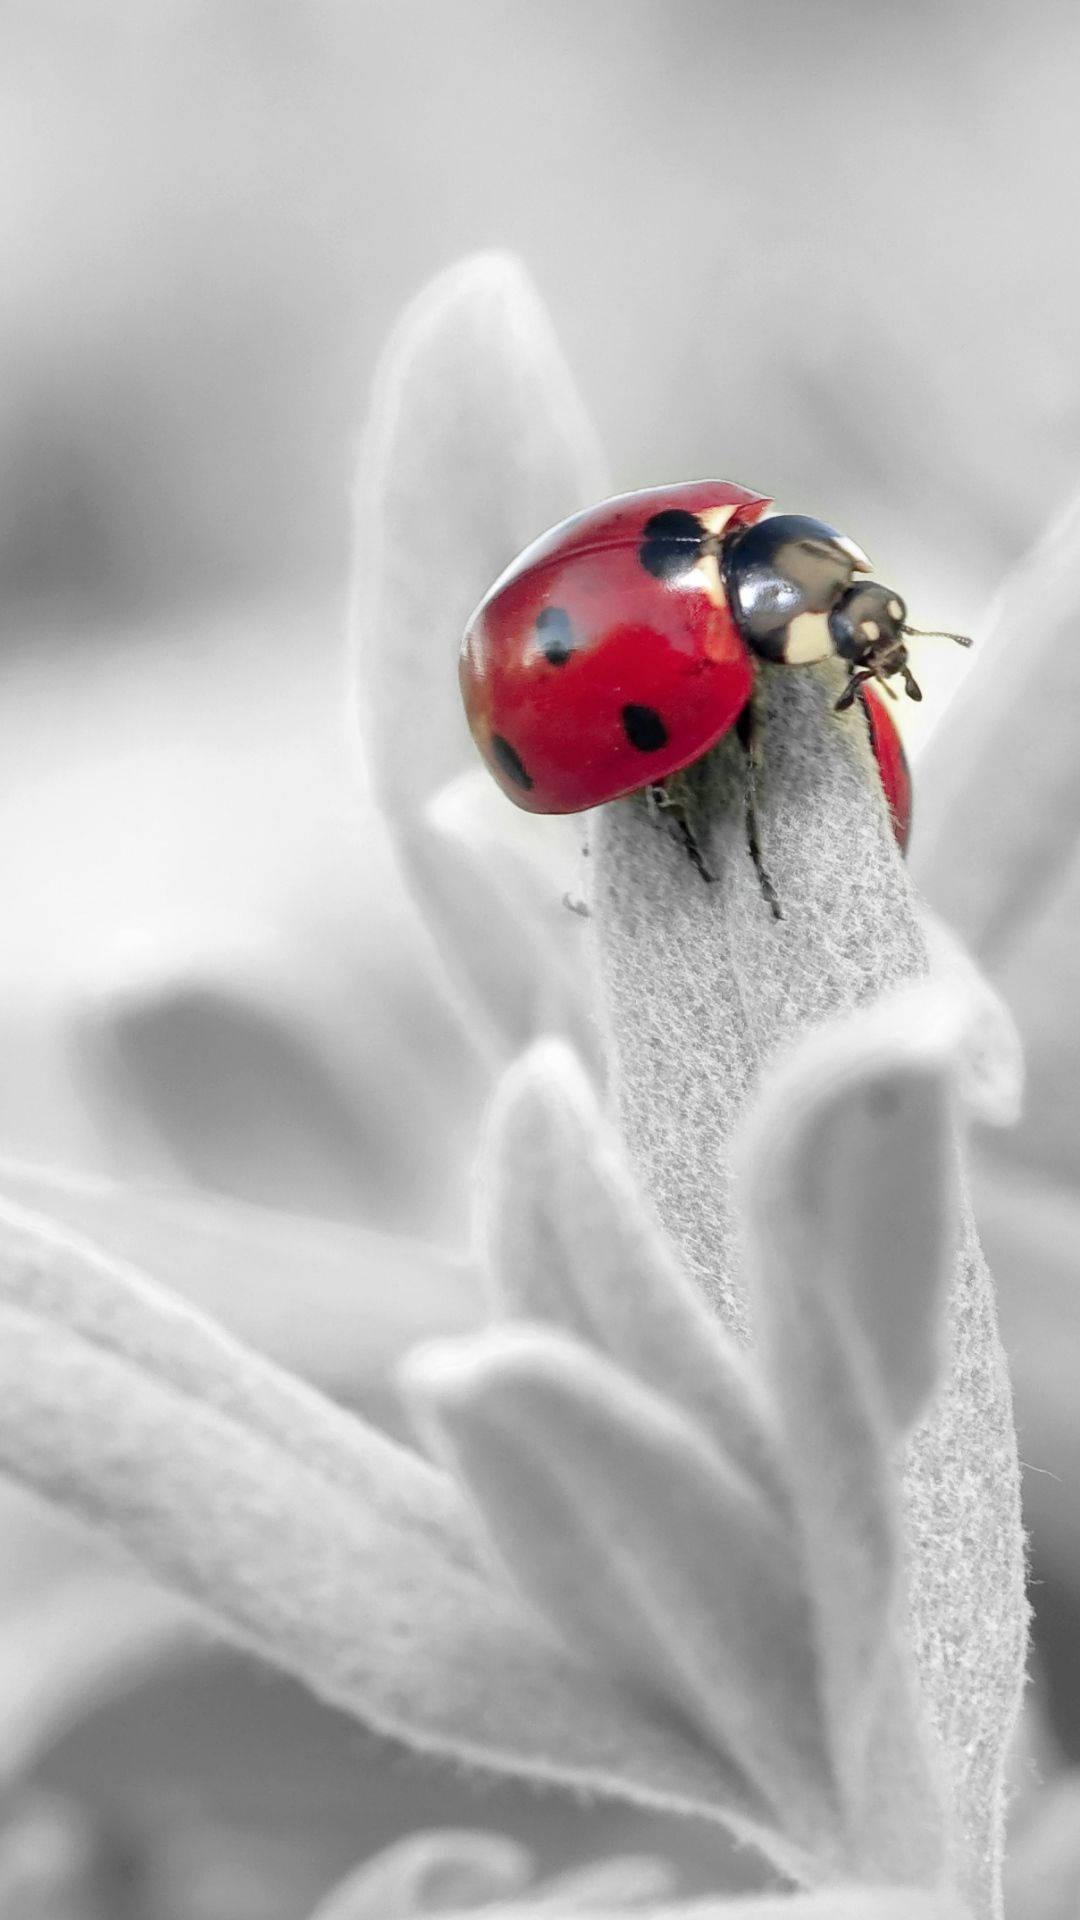 Red Ladybug With Black Dots Wallpaper